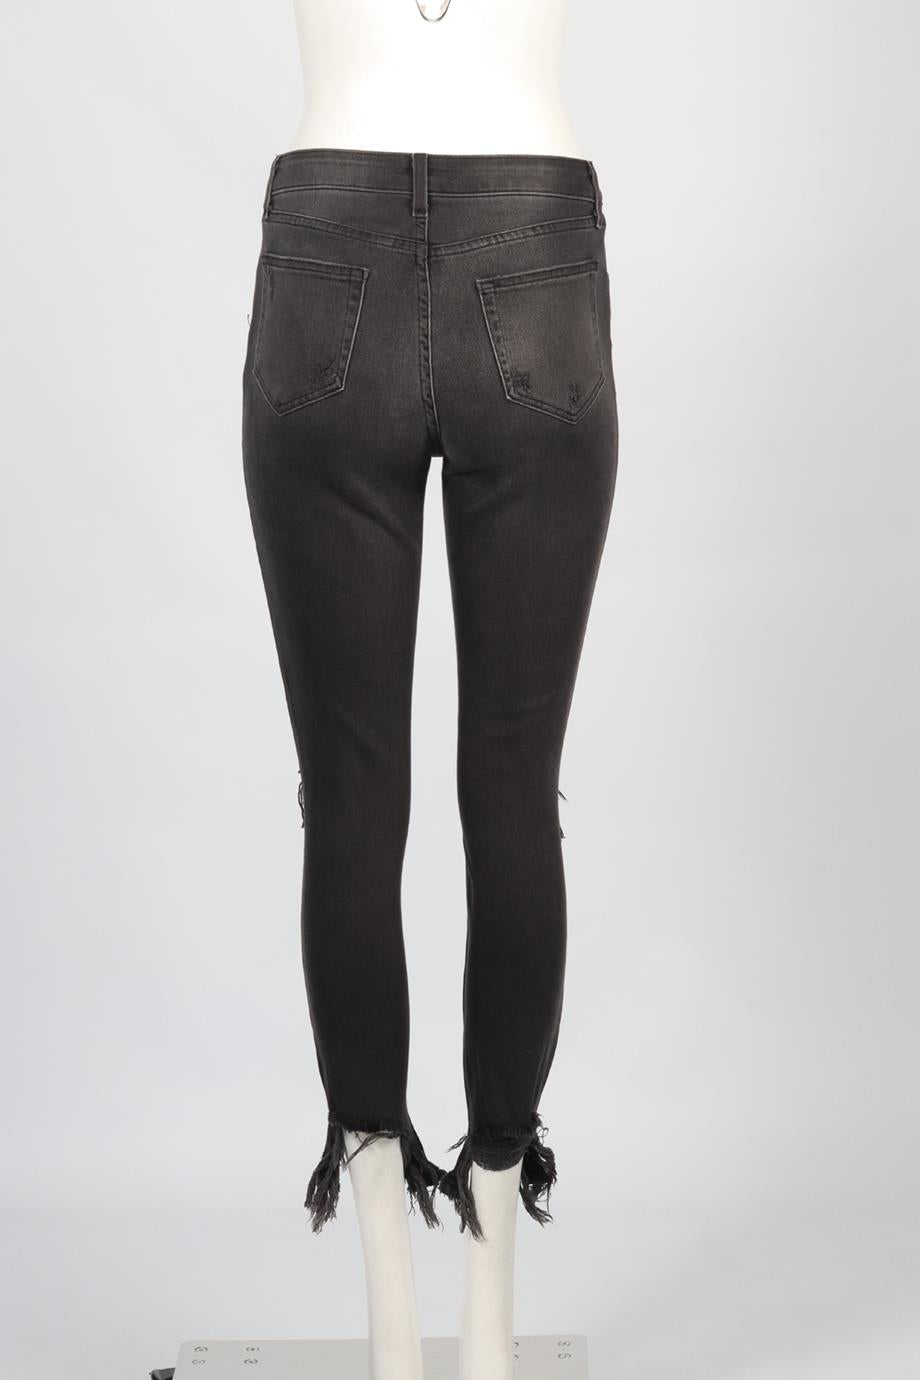 L'AGENCE HIGH RISE SKINNY JEANS W27 UK 8-10